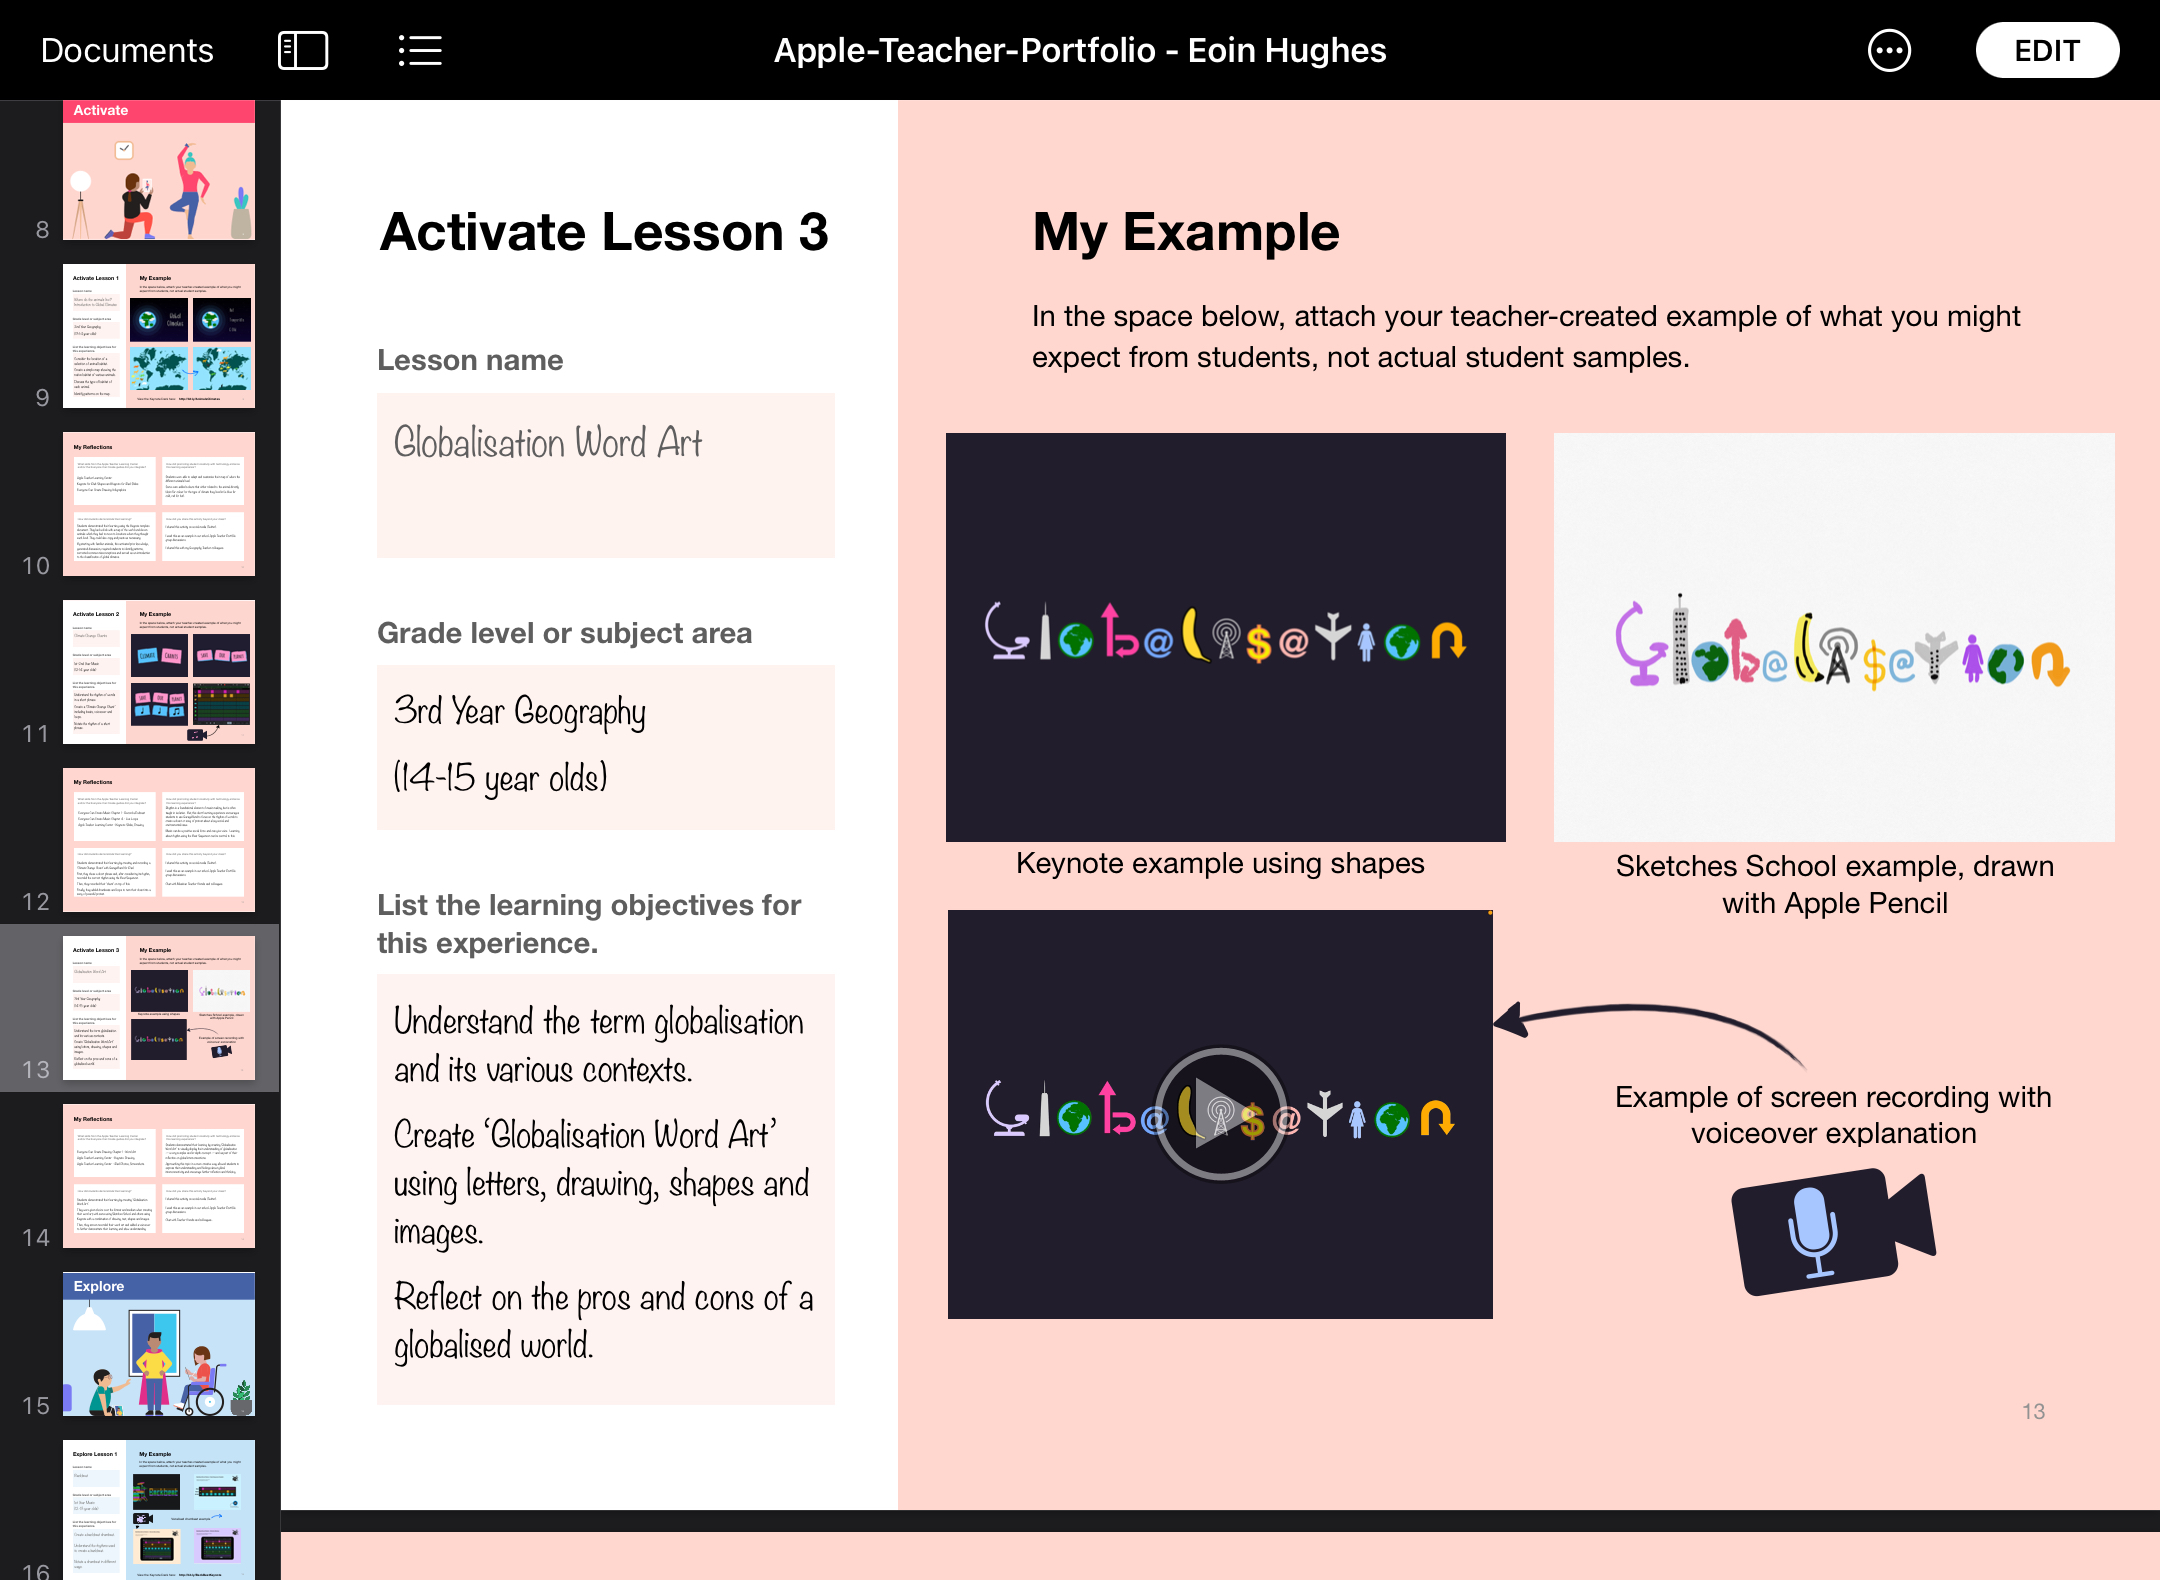 Apple Teacher Portfolio Activate lesson 3 screenshot. Includes the lesson name, learning objectives & lesson example images. 